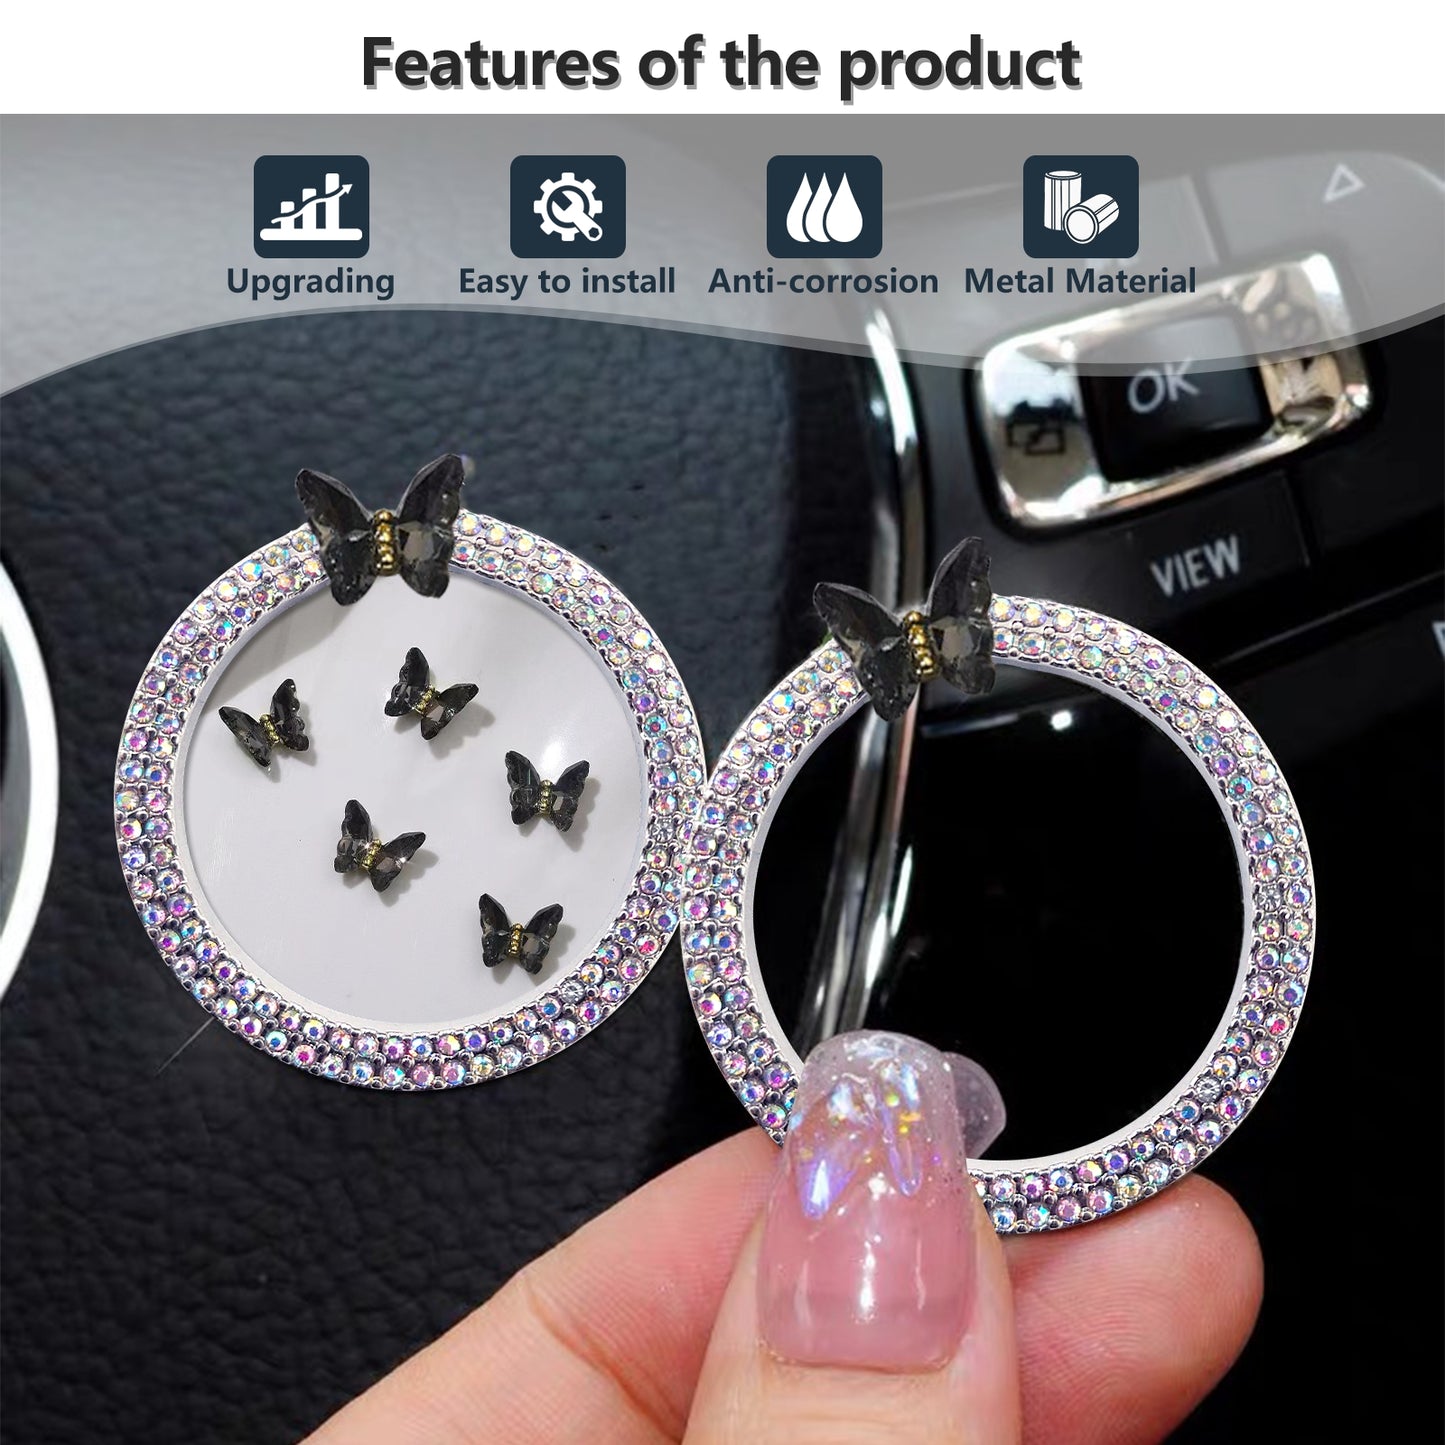 Black Butterfly Car Bling Ring Emblem - Car Accessories for Wowen